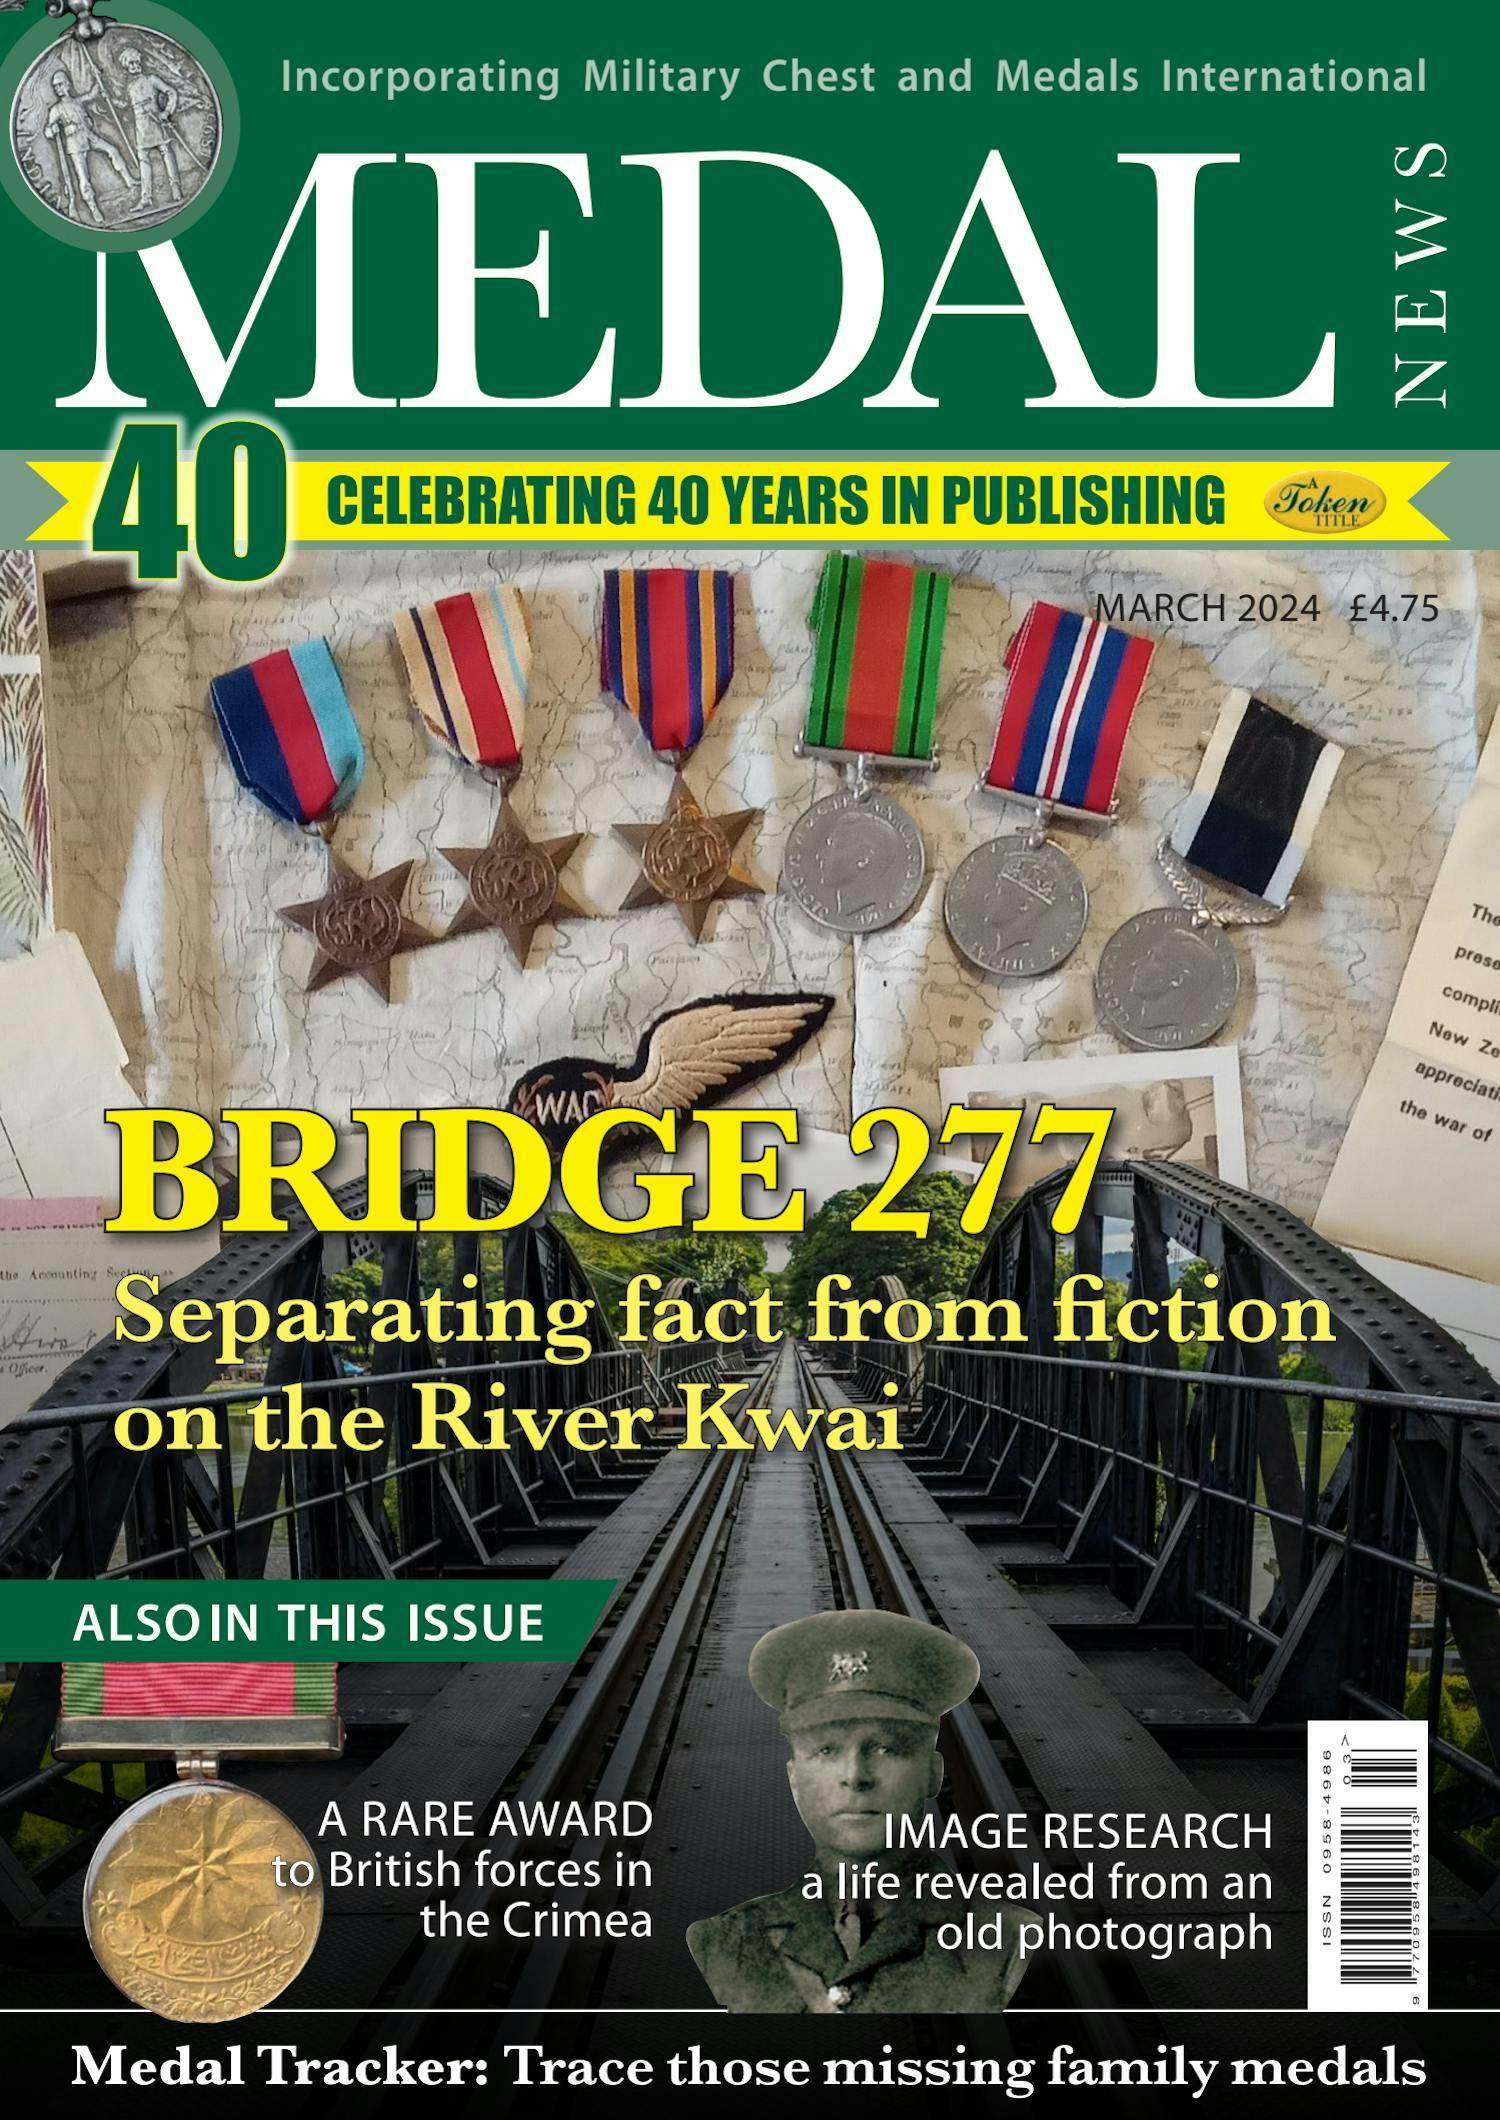 The front cover of Medal News, March 2024 - Volume 62, Number 3